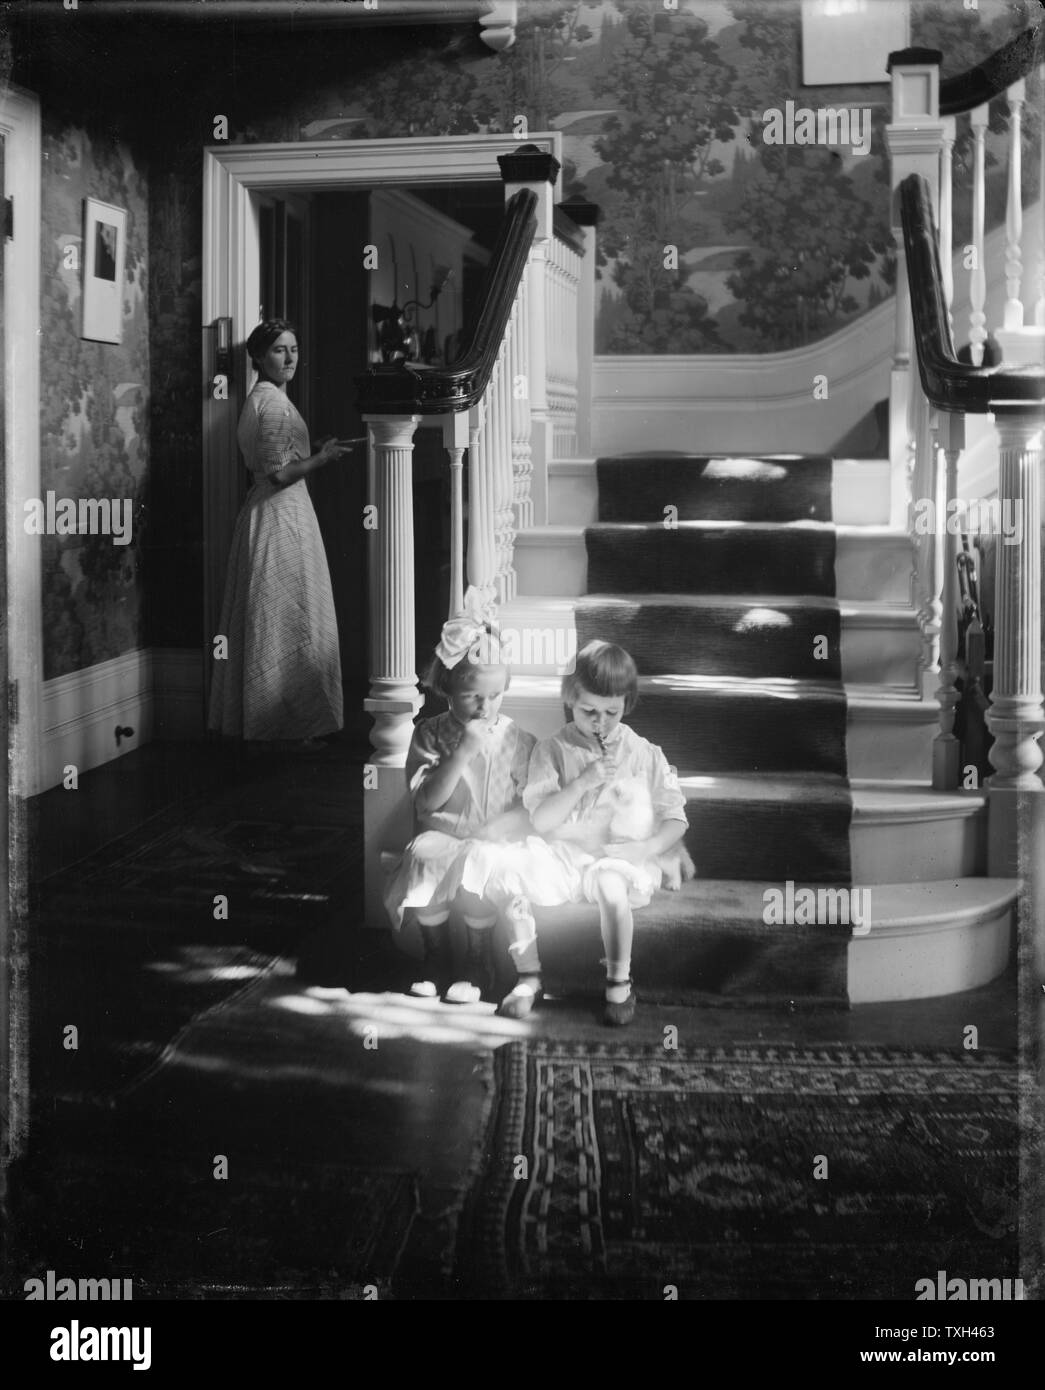 Gertrude Käsebier American school Lollipops : Photograph of two small girls sitting at the bottom of the stairs in a shaft of sunlight, sucking lollipops, while a woman watches from a doorway. Stock Photo